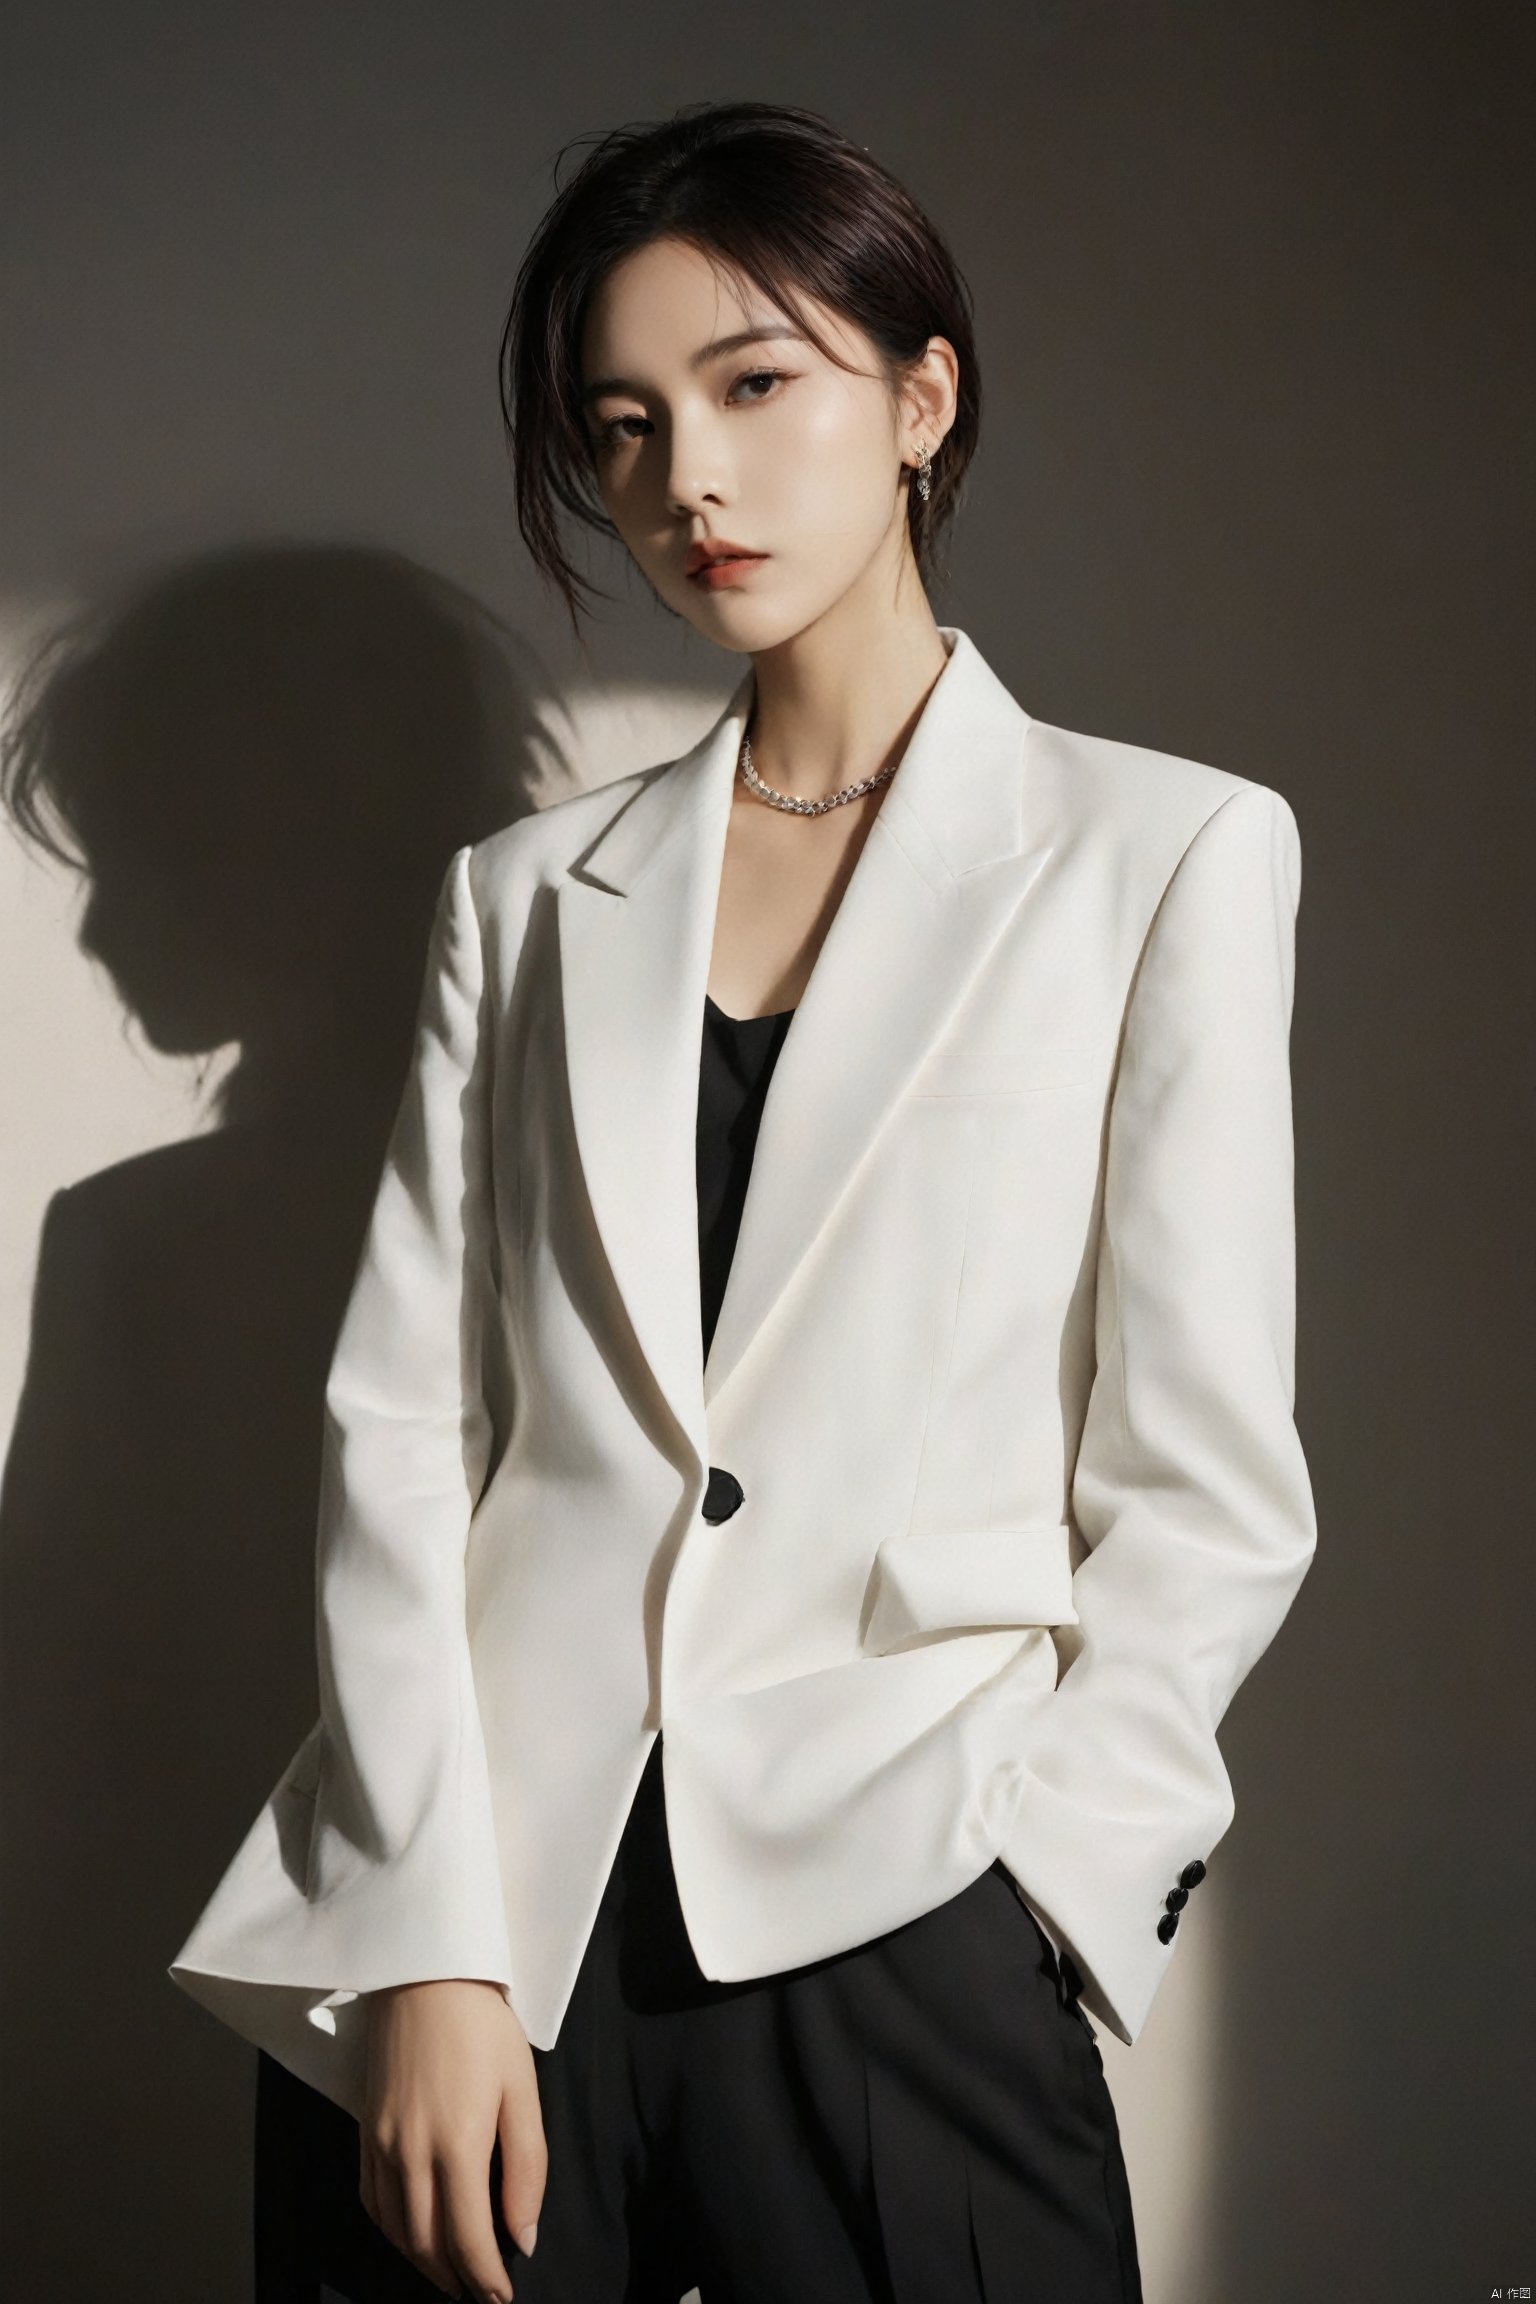  (((magazine cover: 1.4641))), magazine cover, poster, 1girl, full_body_shot, photography_studio, dramatic_photoshoot, high_contrast_lighting, dark_background, androgynous_style, tailored_suit, crisp_white_shirt, black_tie, fitted_jacket, wide_leg_pants, sleek_ankle_boots, slicked_back_hair, bold_eyebrow_arch, smoky_eyes_makeup, minimalist_jewelry, power_pose, hands_in_pockets, sharp_profile, standing_on_platform, strong_posture, shoulders_back, textured_fabric, clean_lines, buttoned_up_look, deep_gaze, fashion_forward, contemporary_portrait, cinematic_lighting, dynamic_shadows, modern_fashion_photography